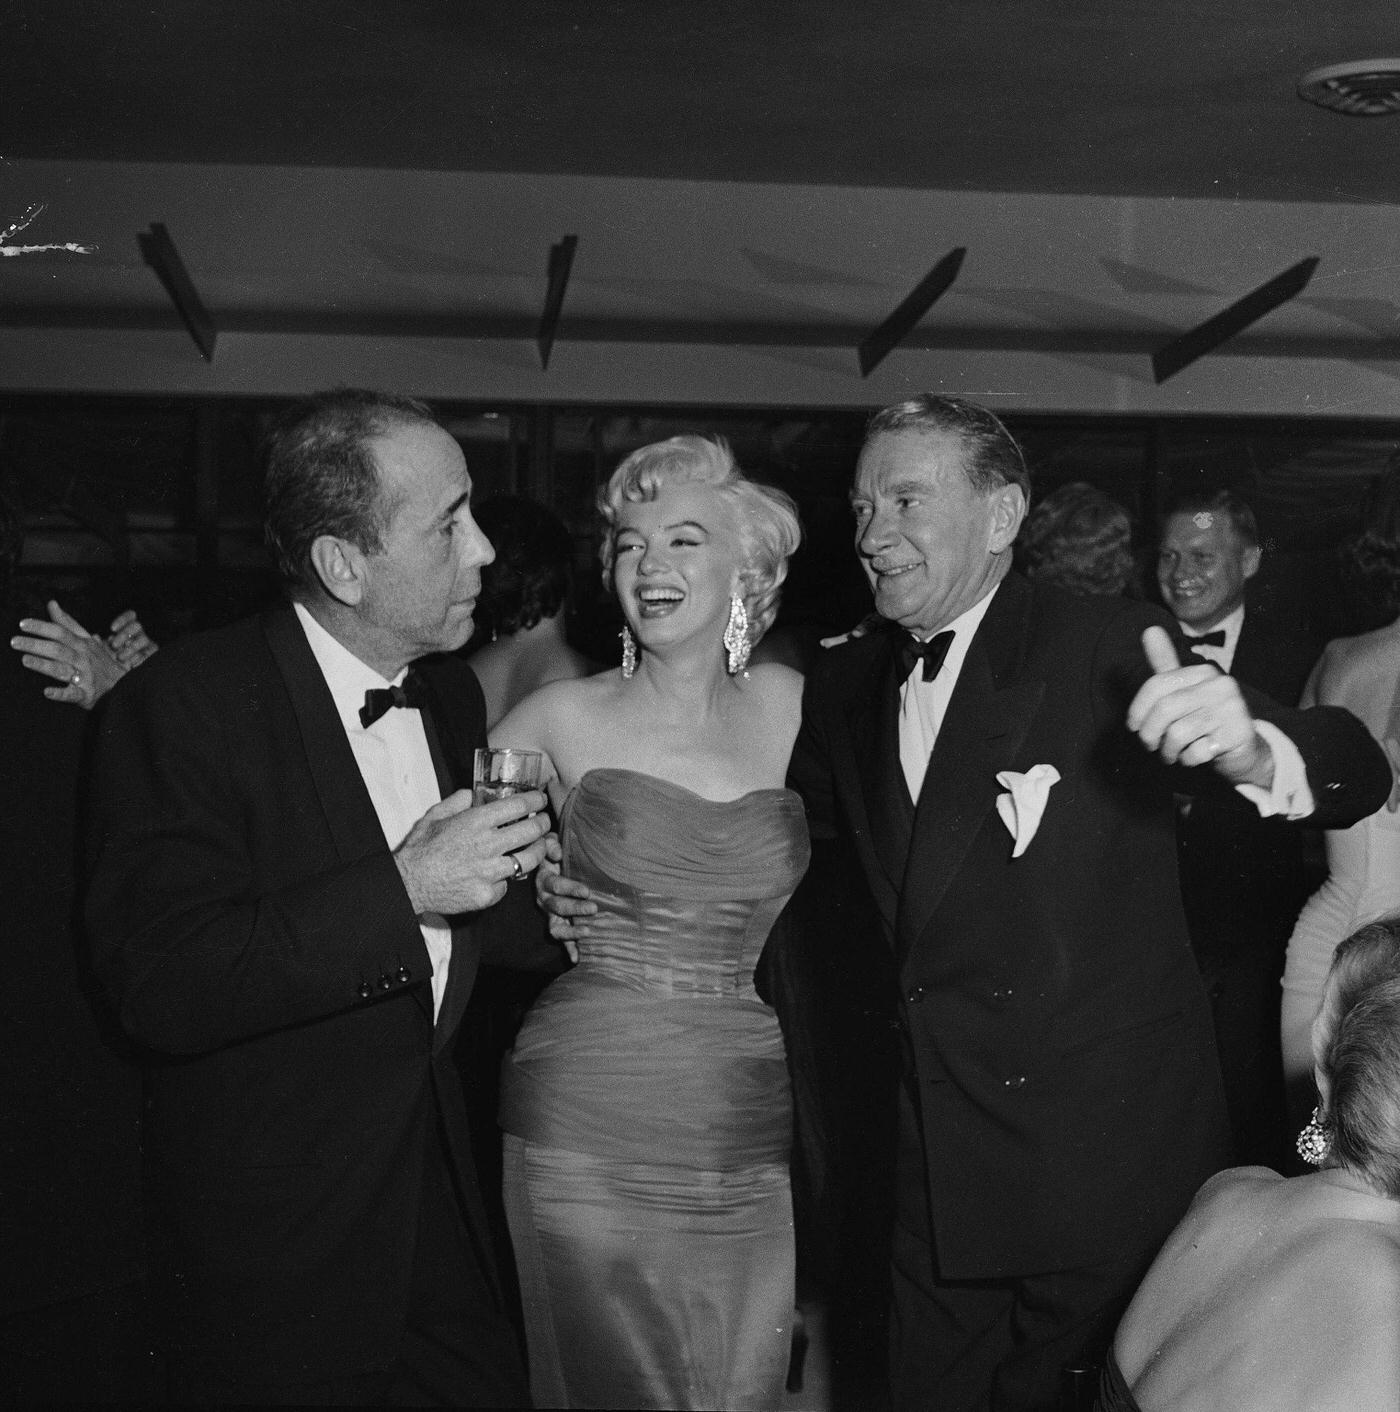 Marilyn Monroe with actors Humphrey Bogart and Clifton Webb at the wrap party for the filming of "The Seven Year Itch" at Romanoff's Restaurant in 1954